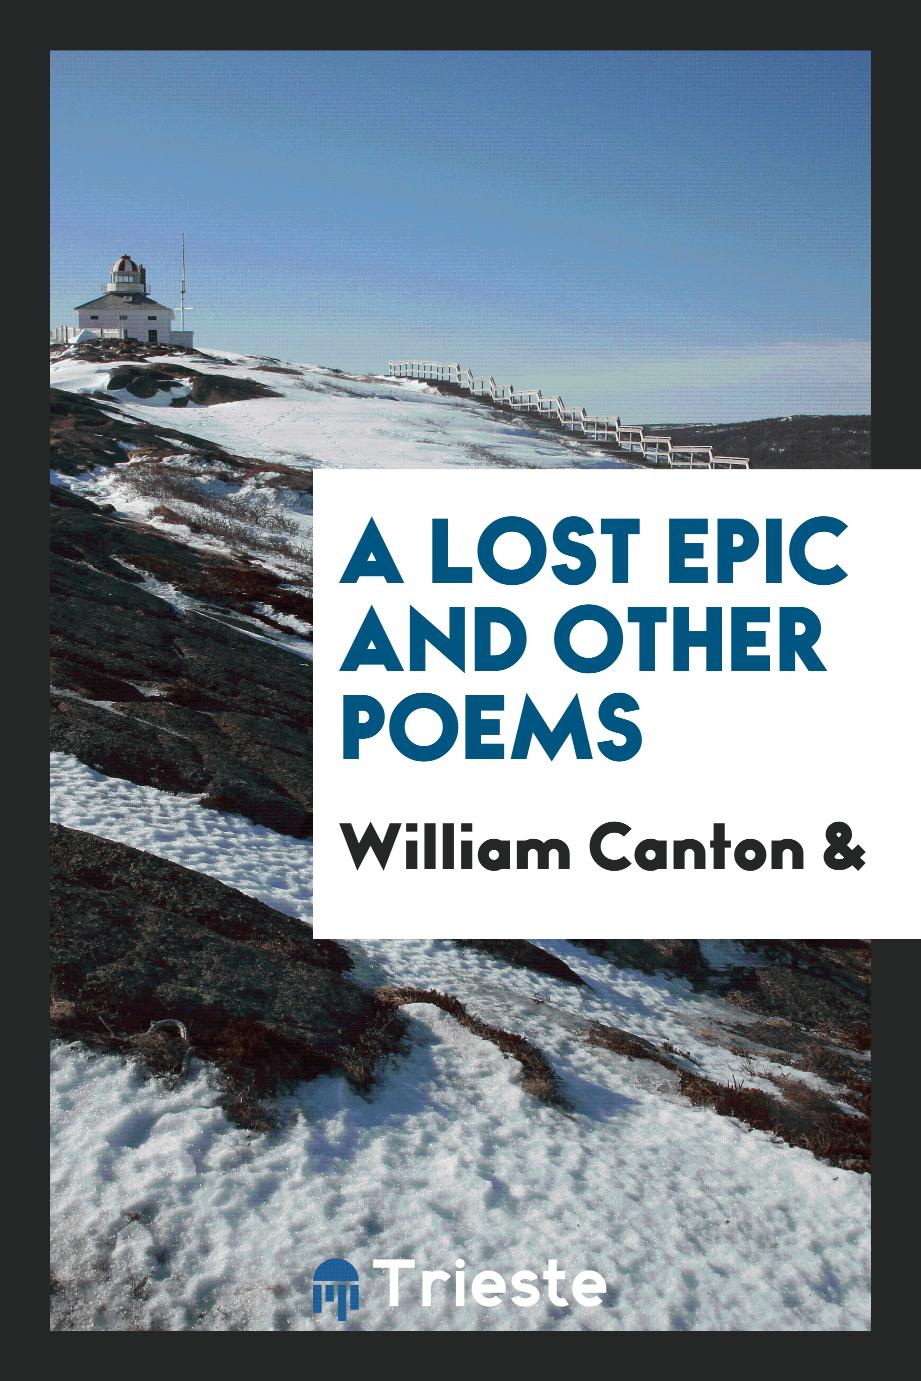 A lost epic and other poems